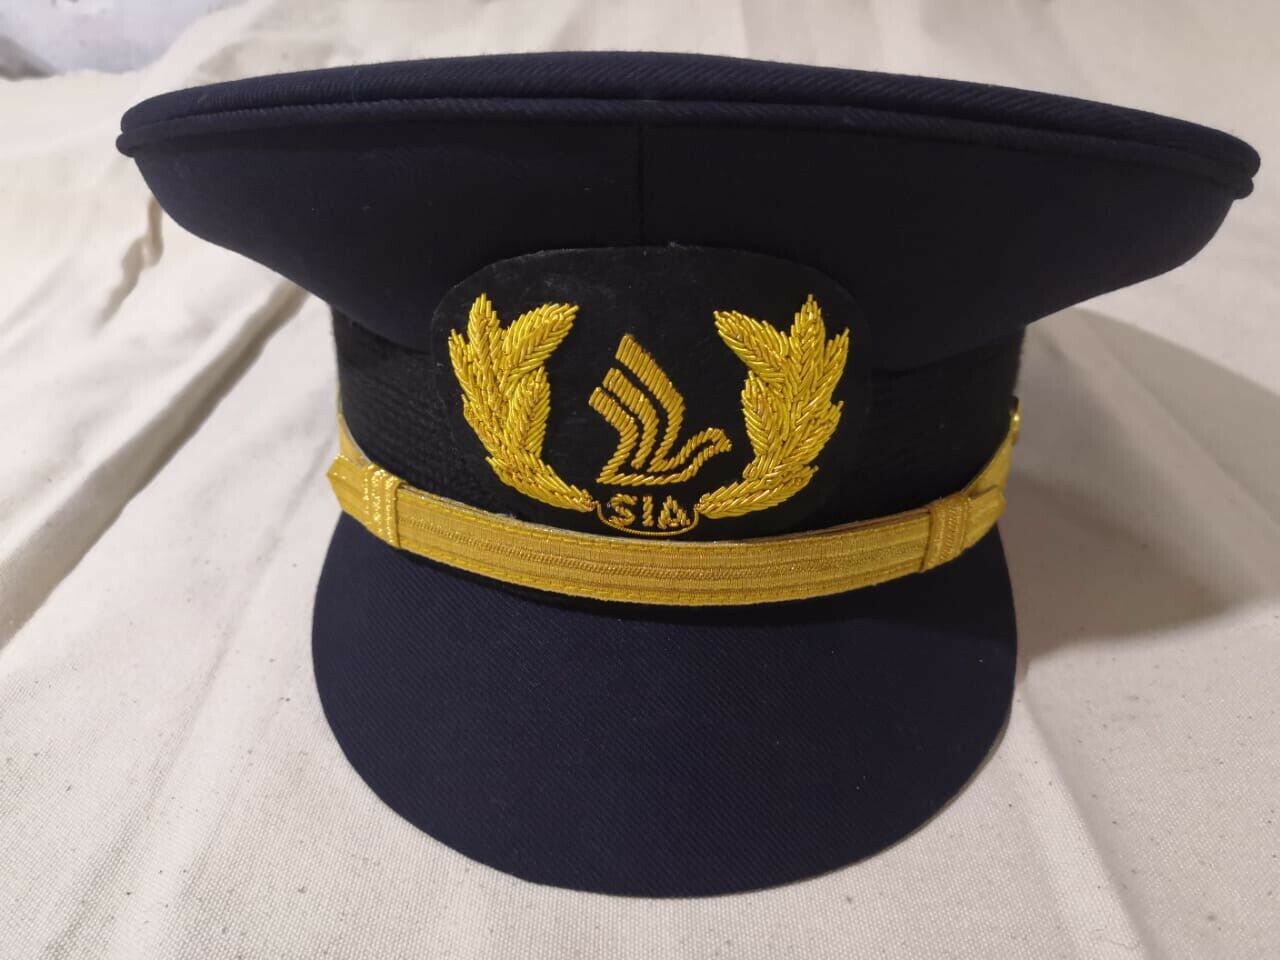 Singapore airlines hat